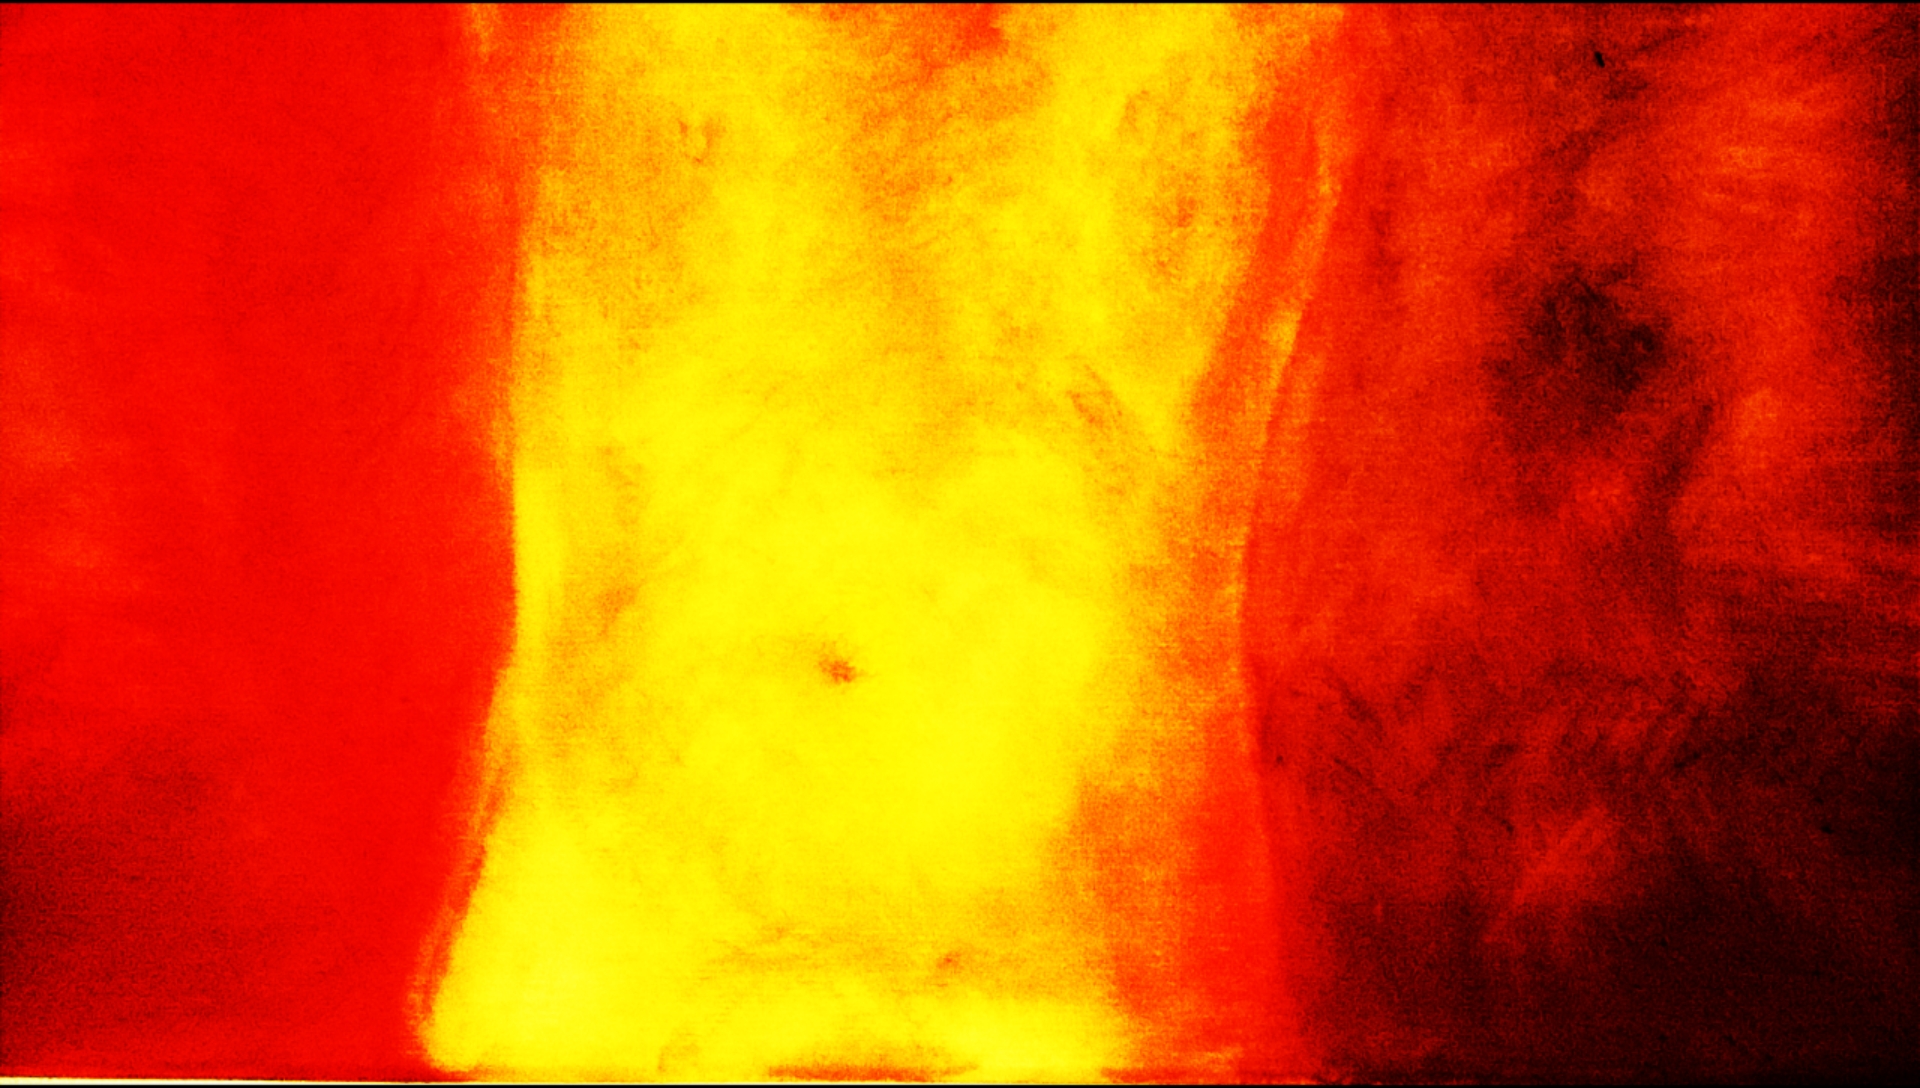 Digital drawing showing torso in bright red, orange and yellow.